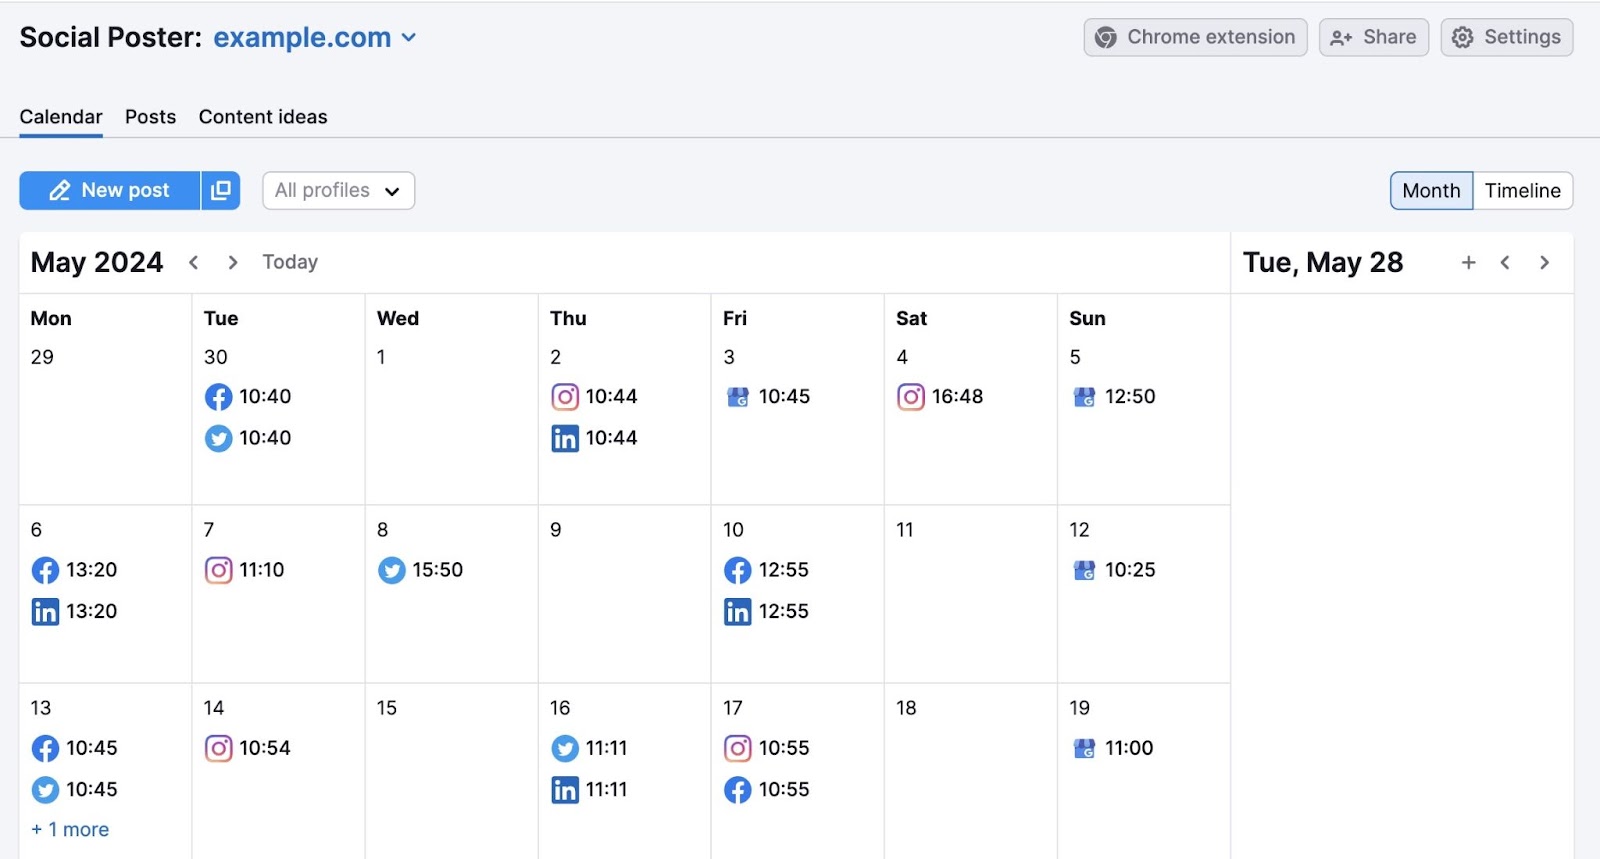 Calendar view on Social Poster showing the posts scheduled on each day of the month across different channels.